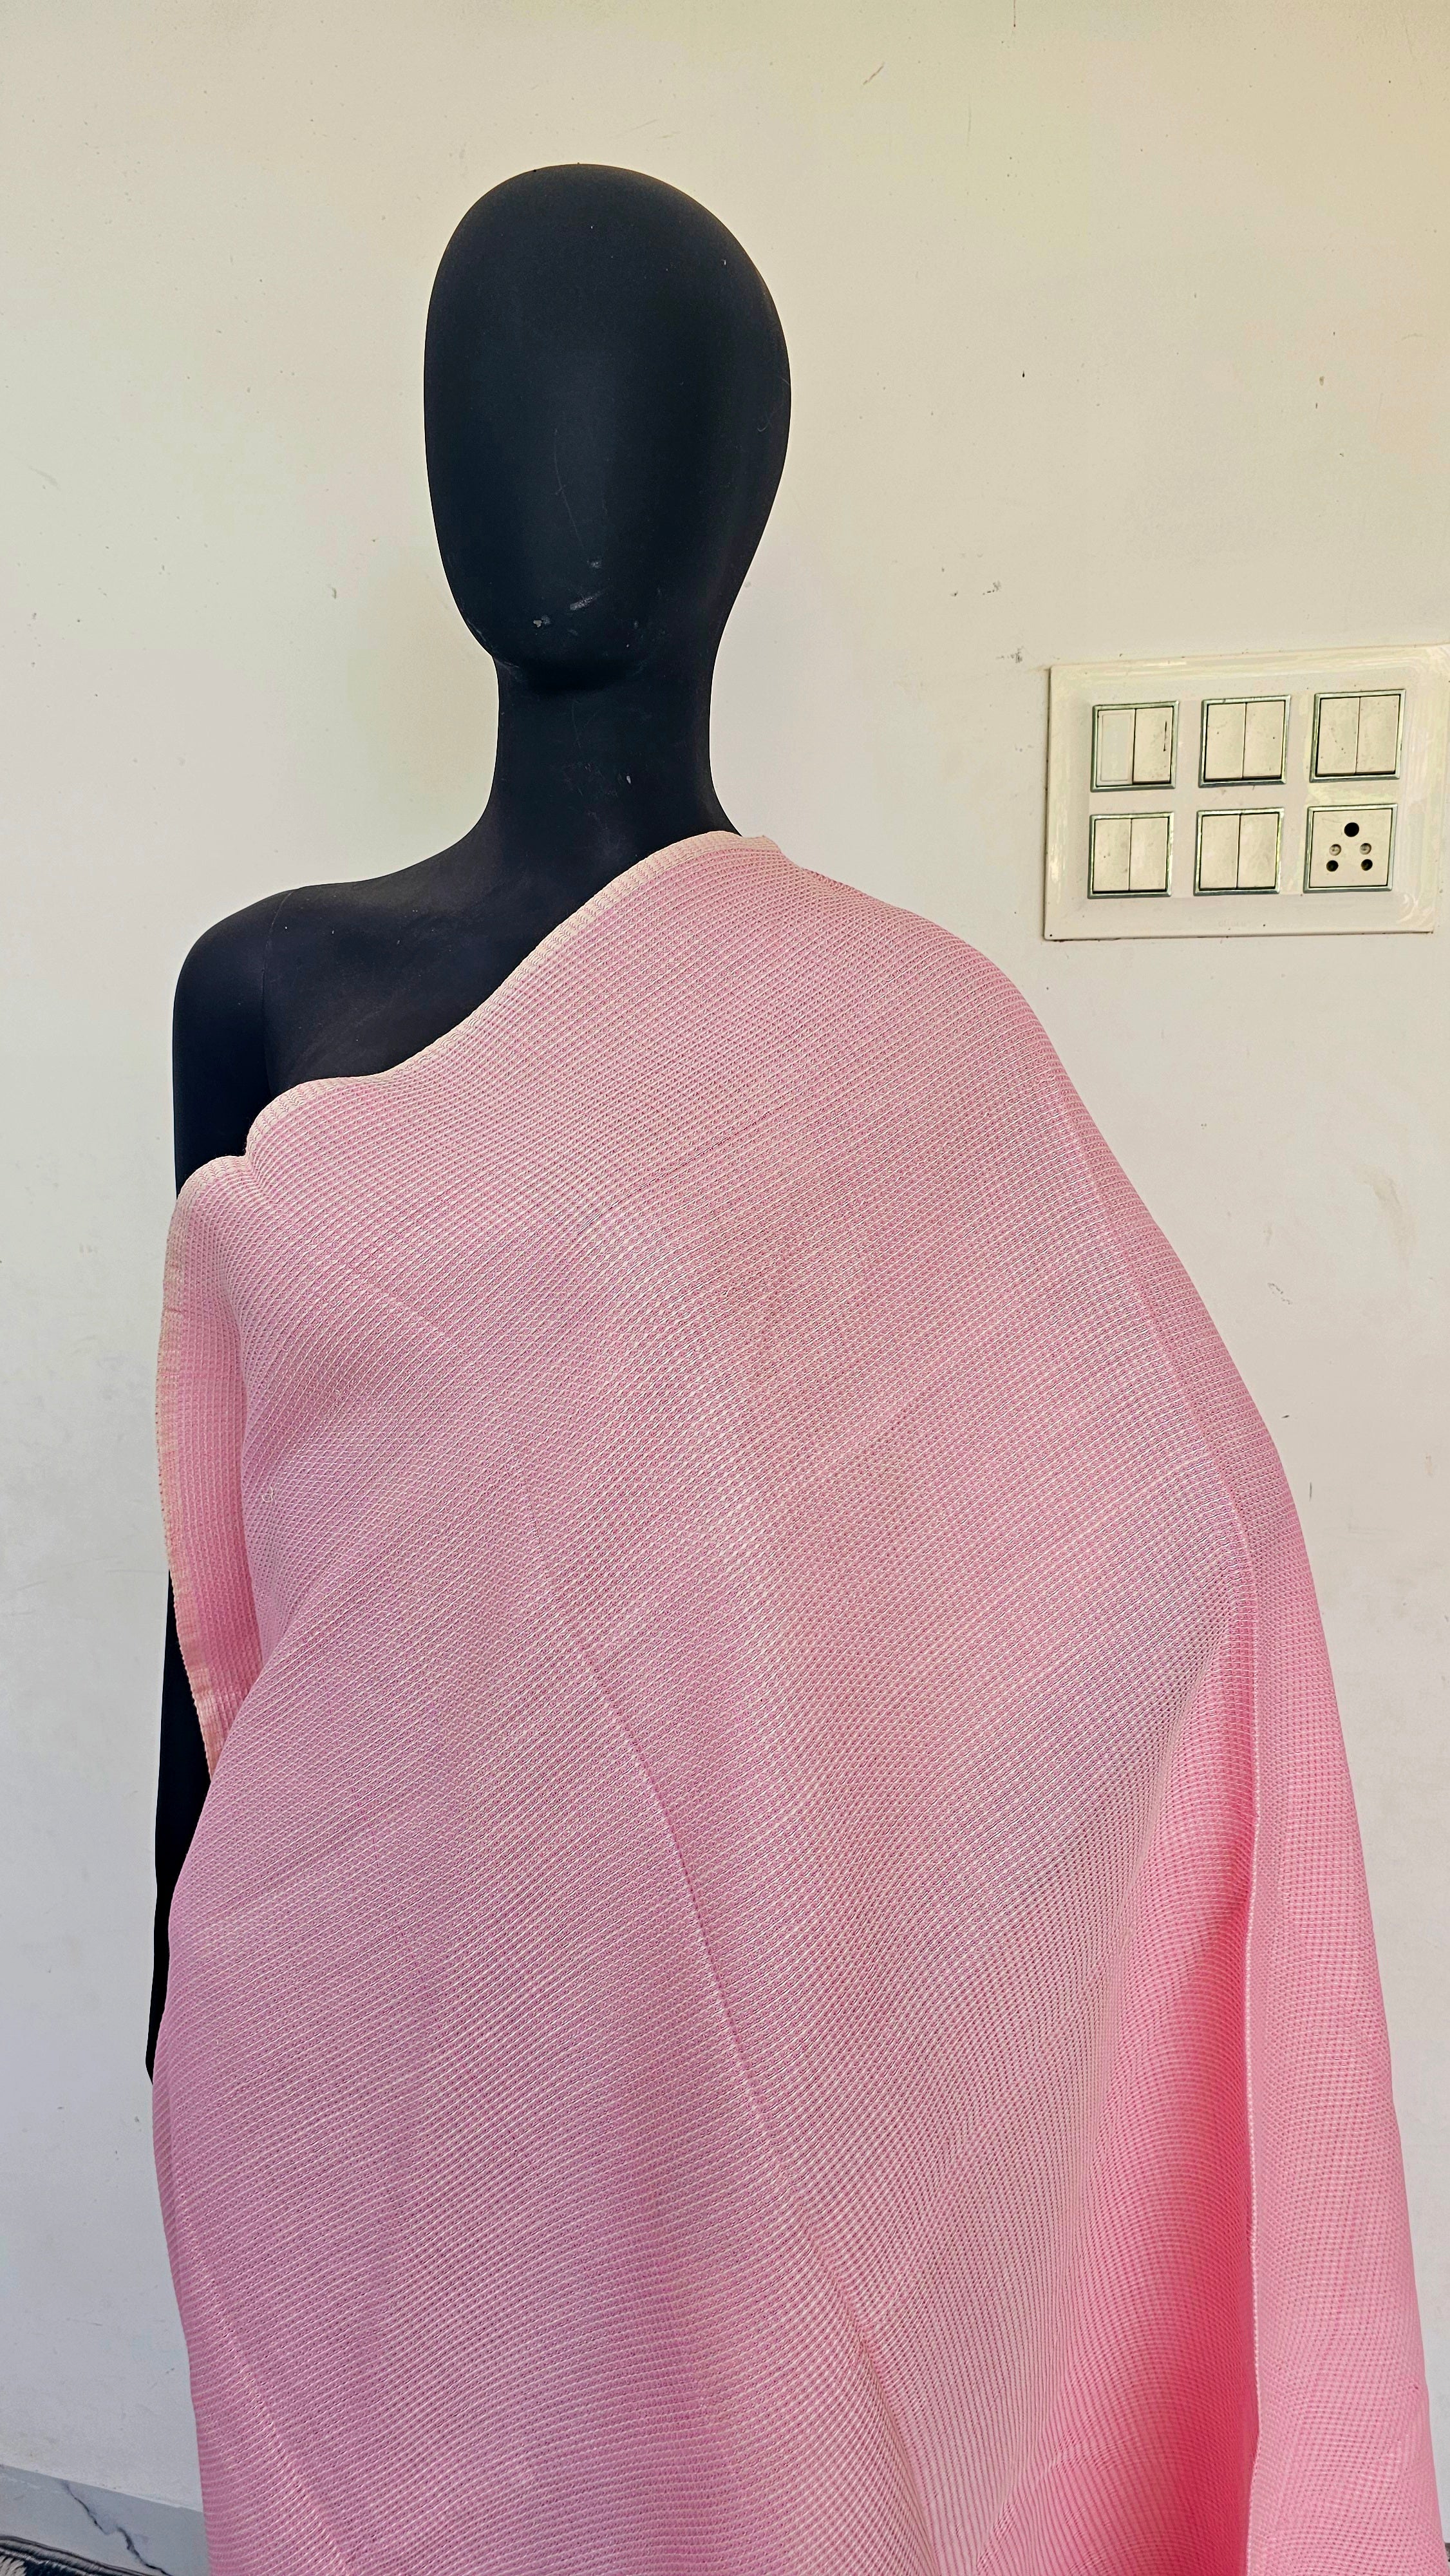 Fabric in Cotton woven on 6 pedal Handloom.